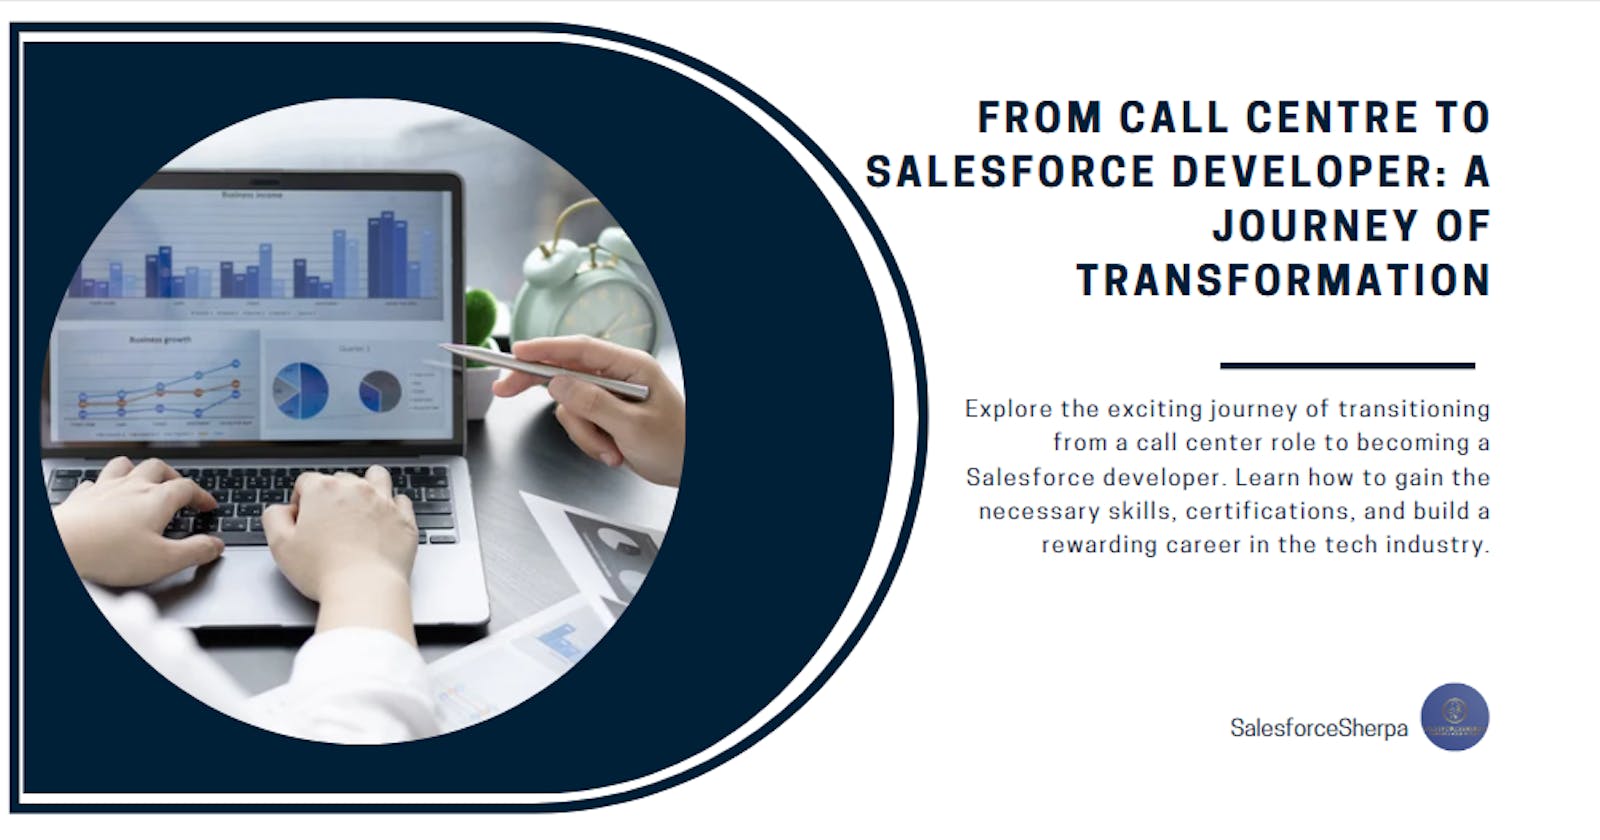 From Call Centre to Salesforce Developer: A Journey of Transformation